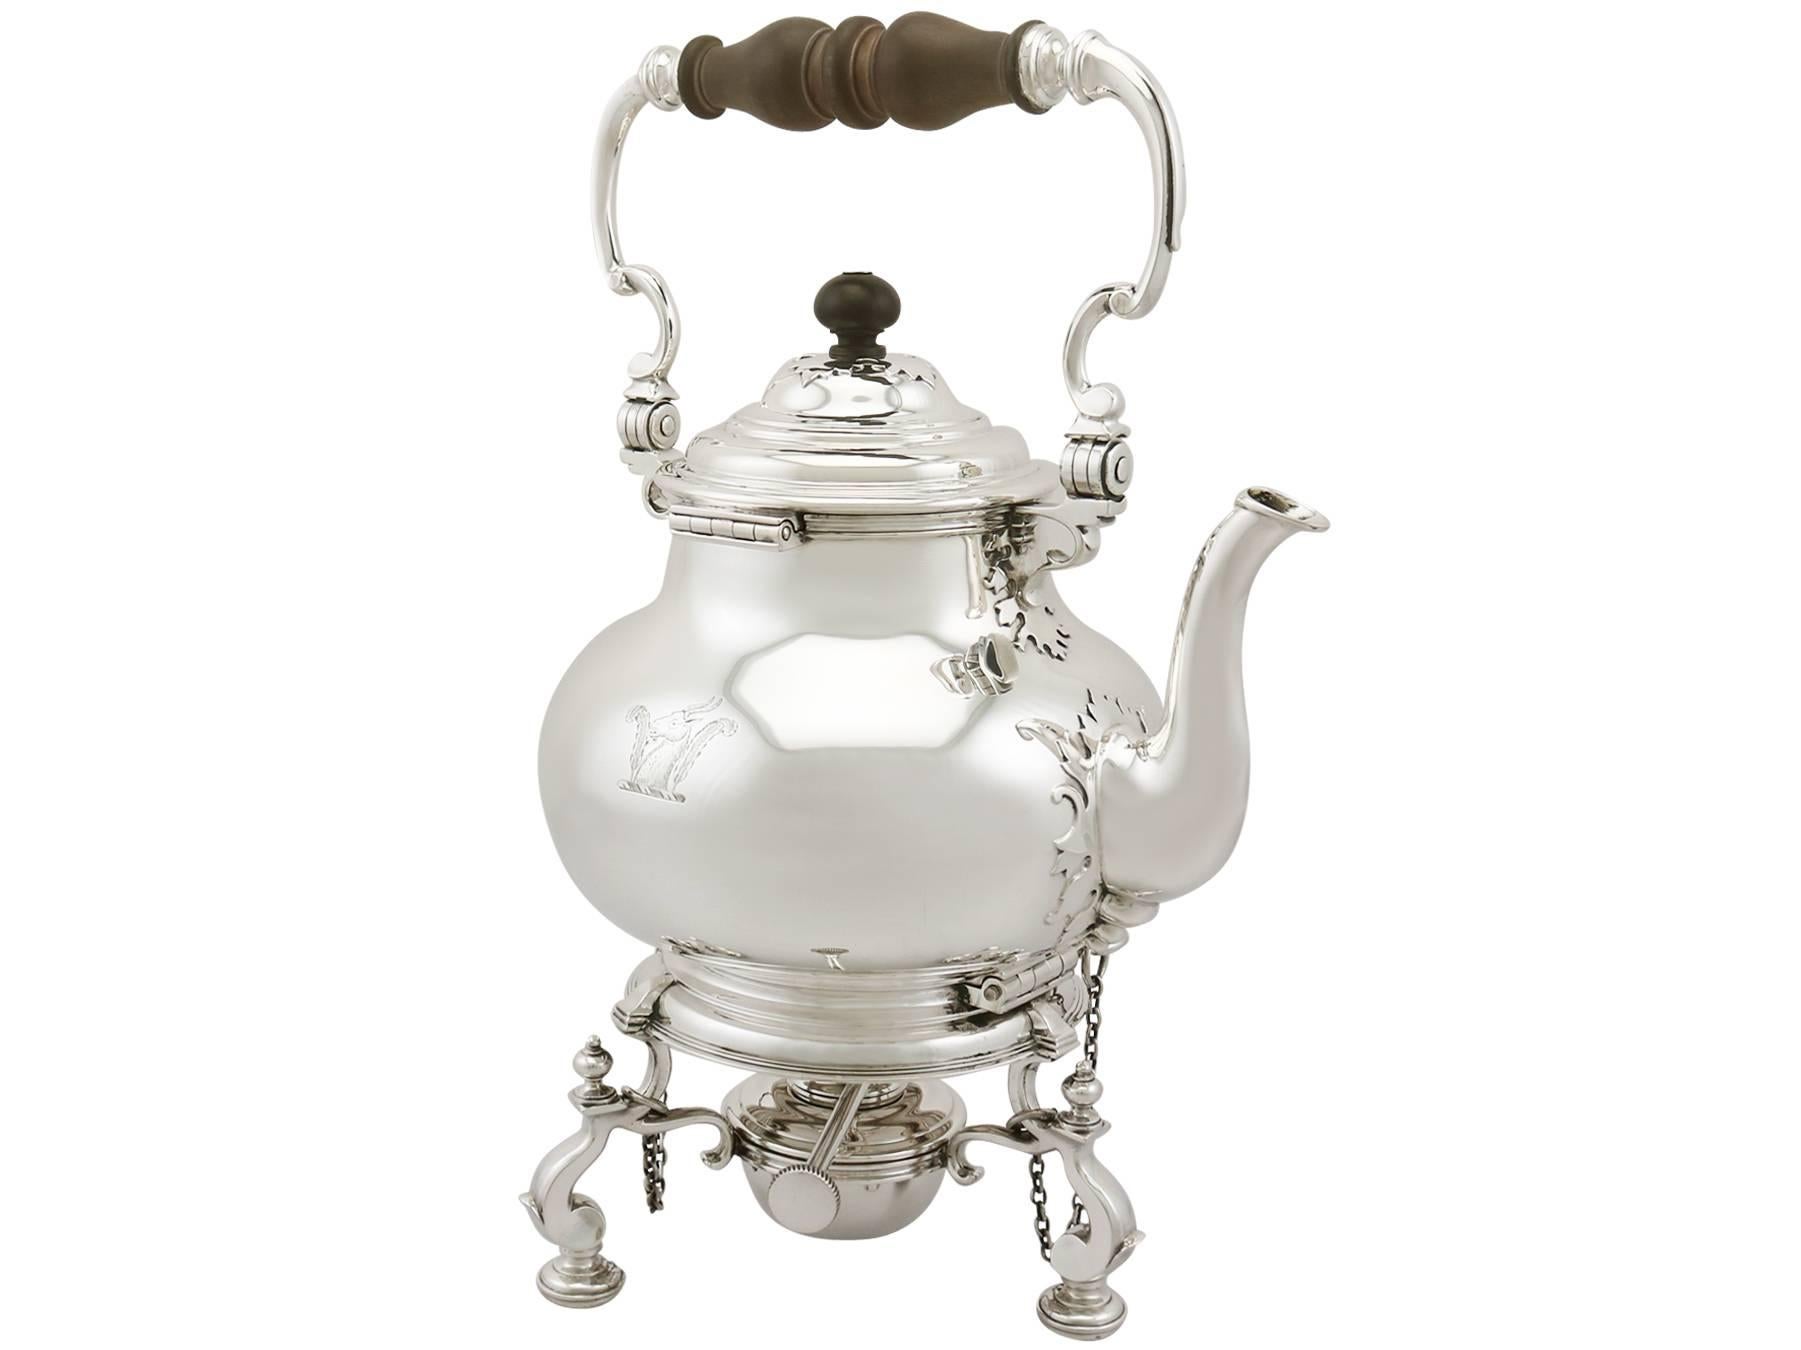 An exceptional, fine, impressive, antique George V English sterling silver ten piece tea and coffee service made by Crichton Brothers; an addition to our diverse teaware collection.

This exceptional antique George V ten piece silver tea and